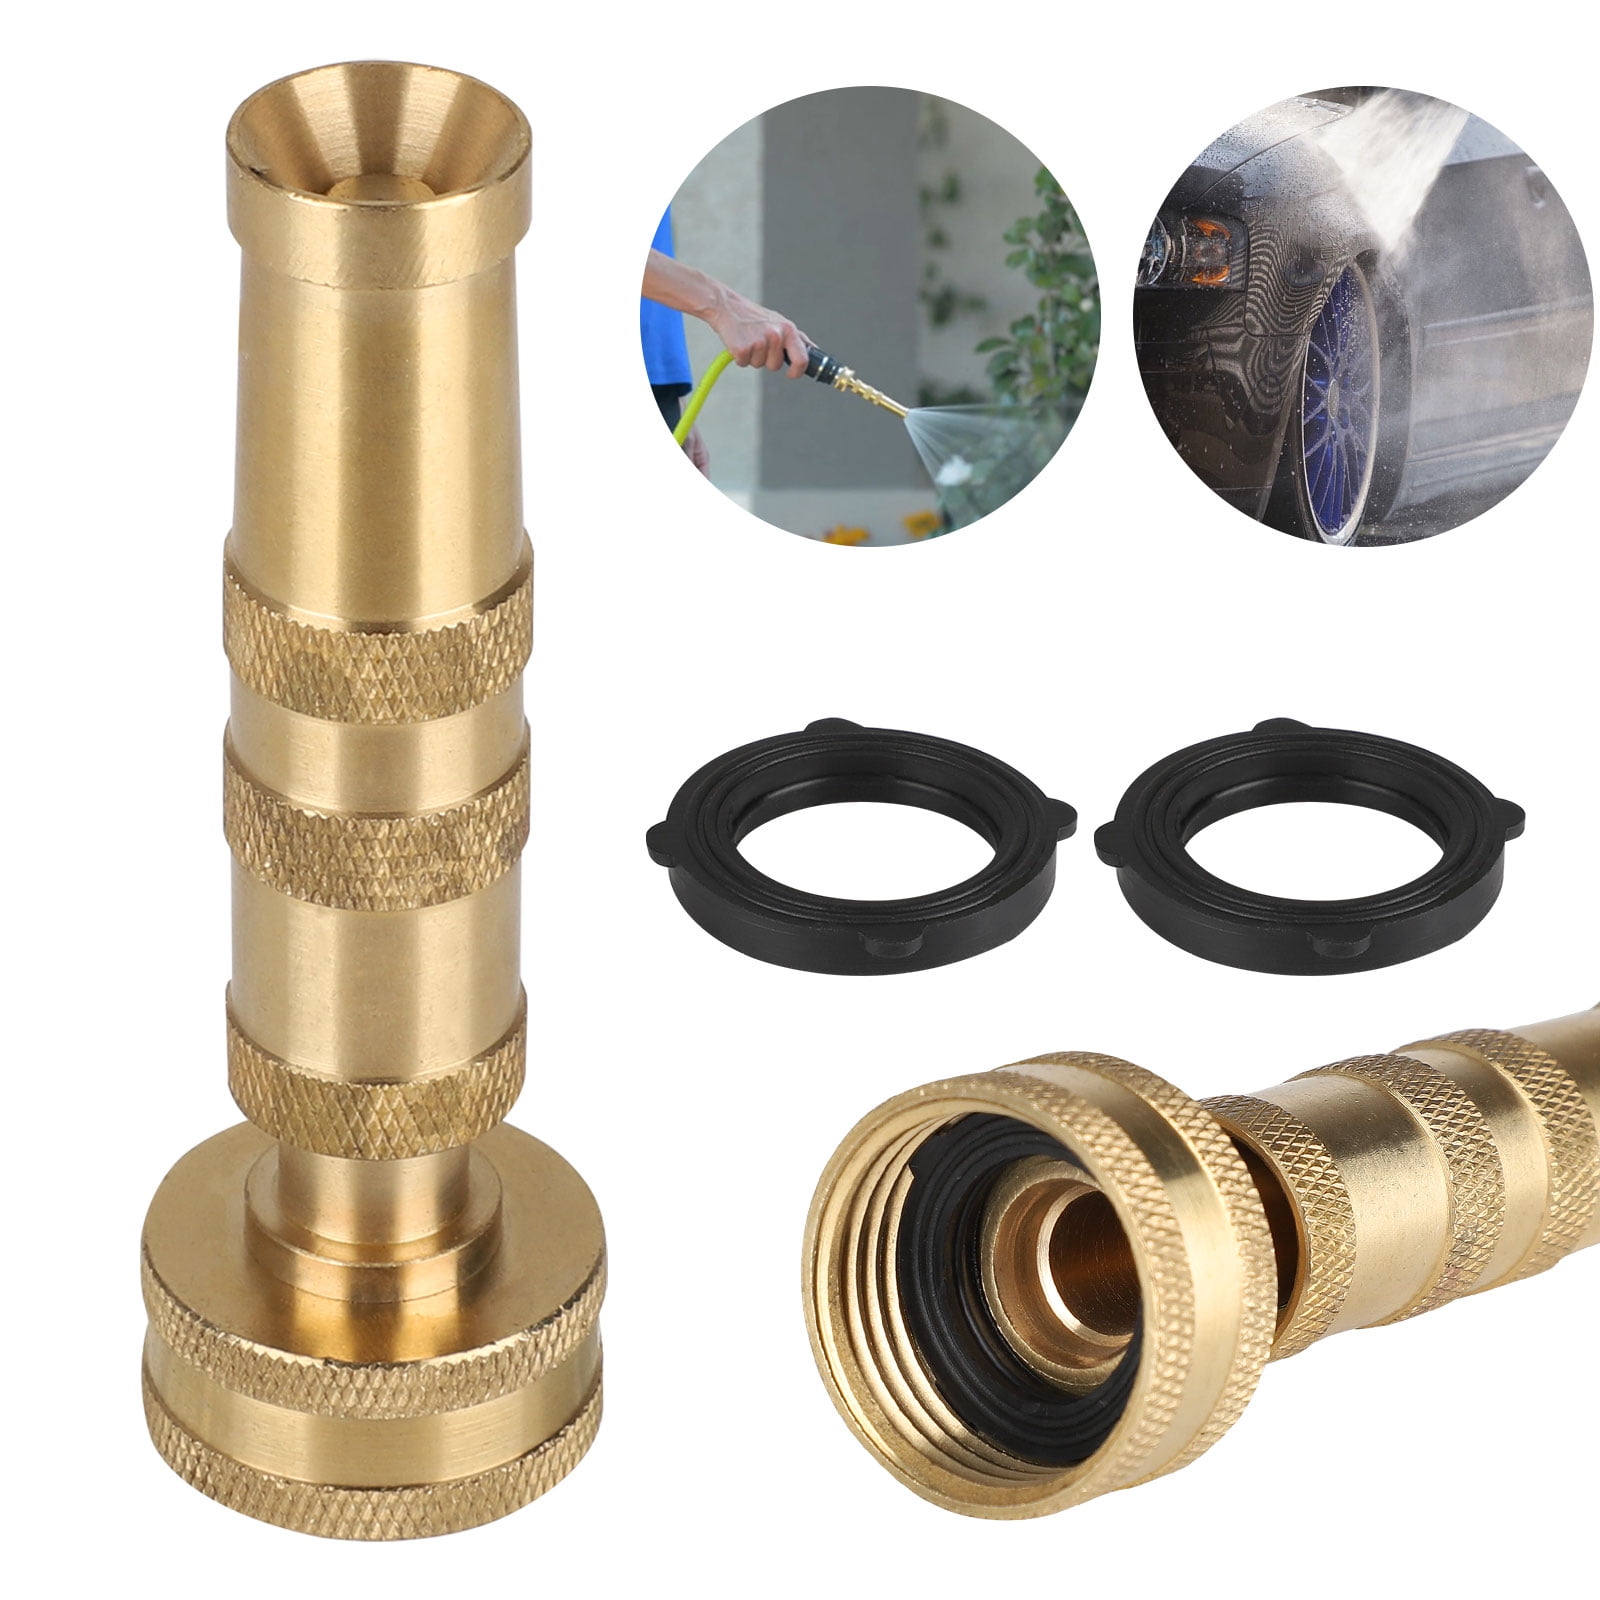 Solid Brass Fittings Made USA Water Hose Nozzle High Pressure For Car Garden 